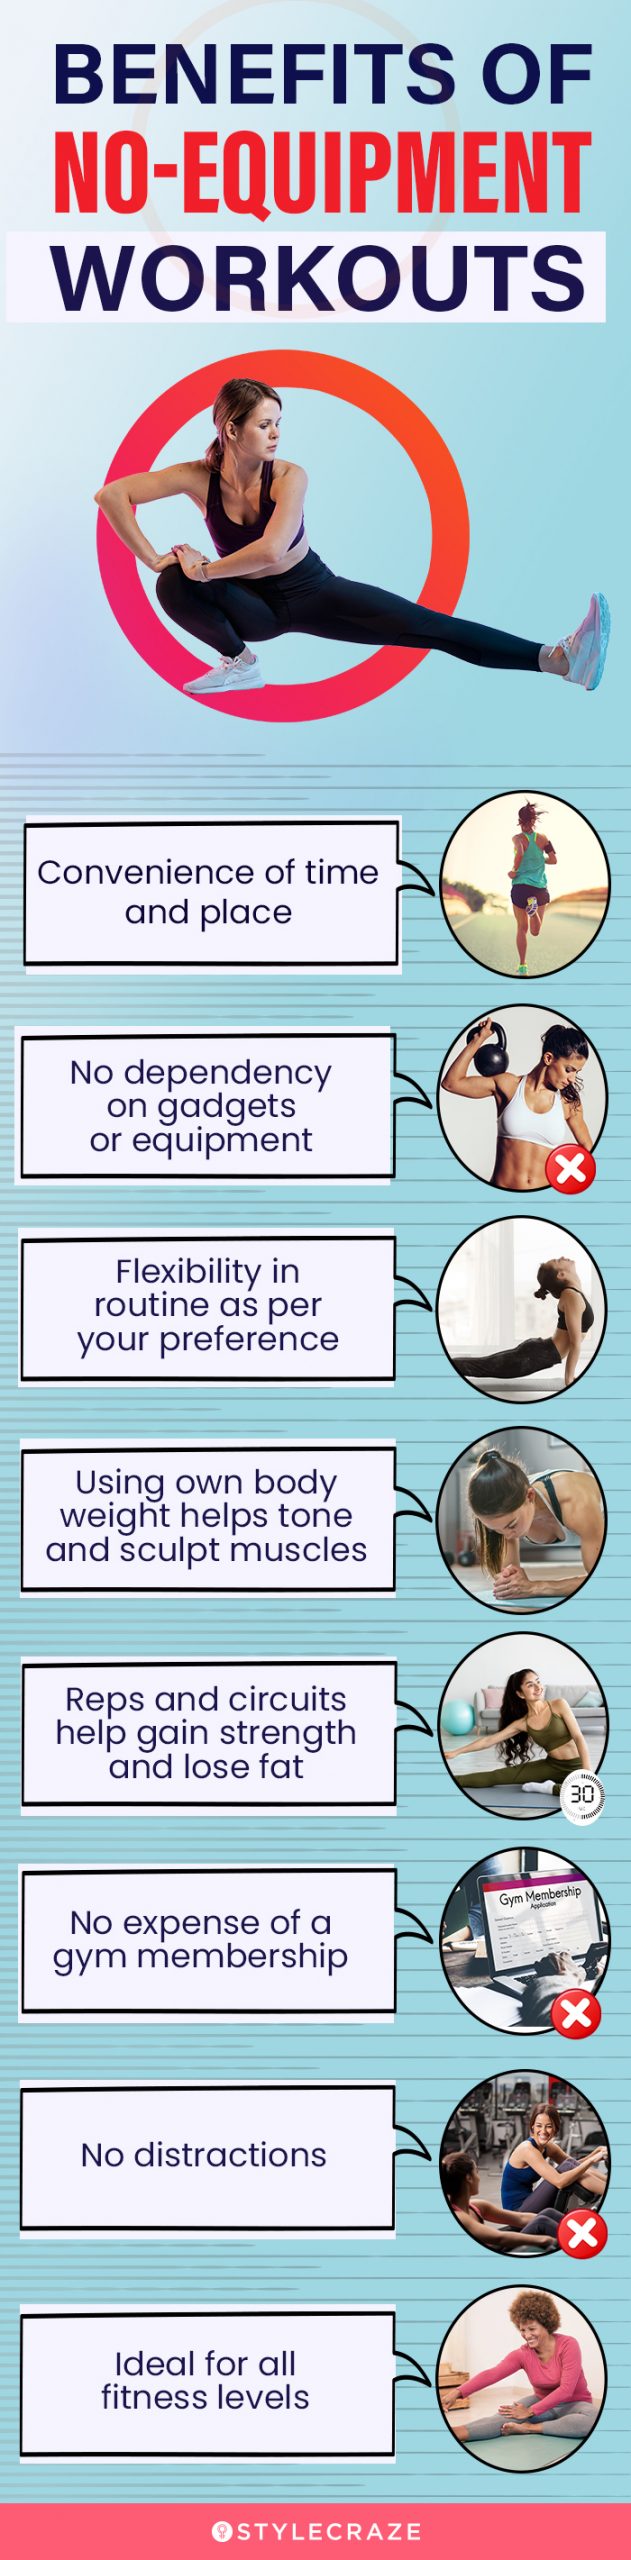 benifits of no equipment workout [infographic]